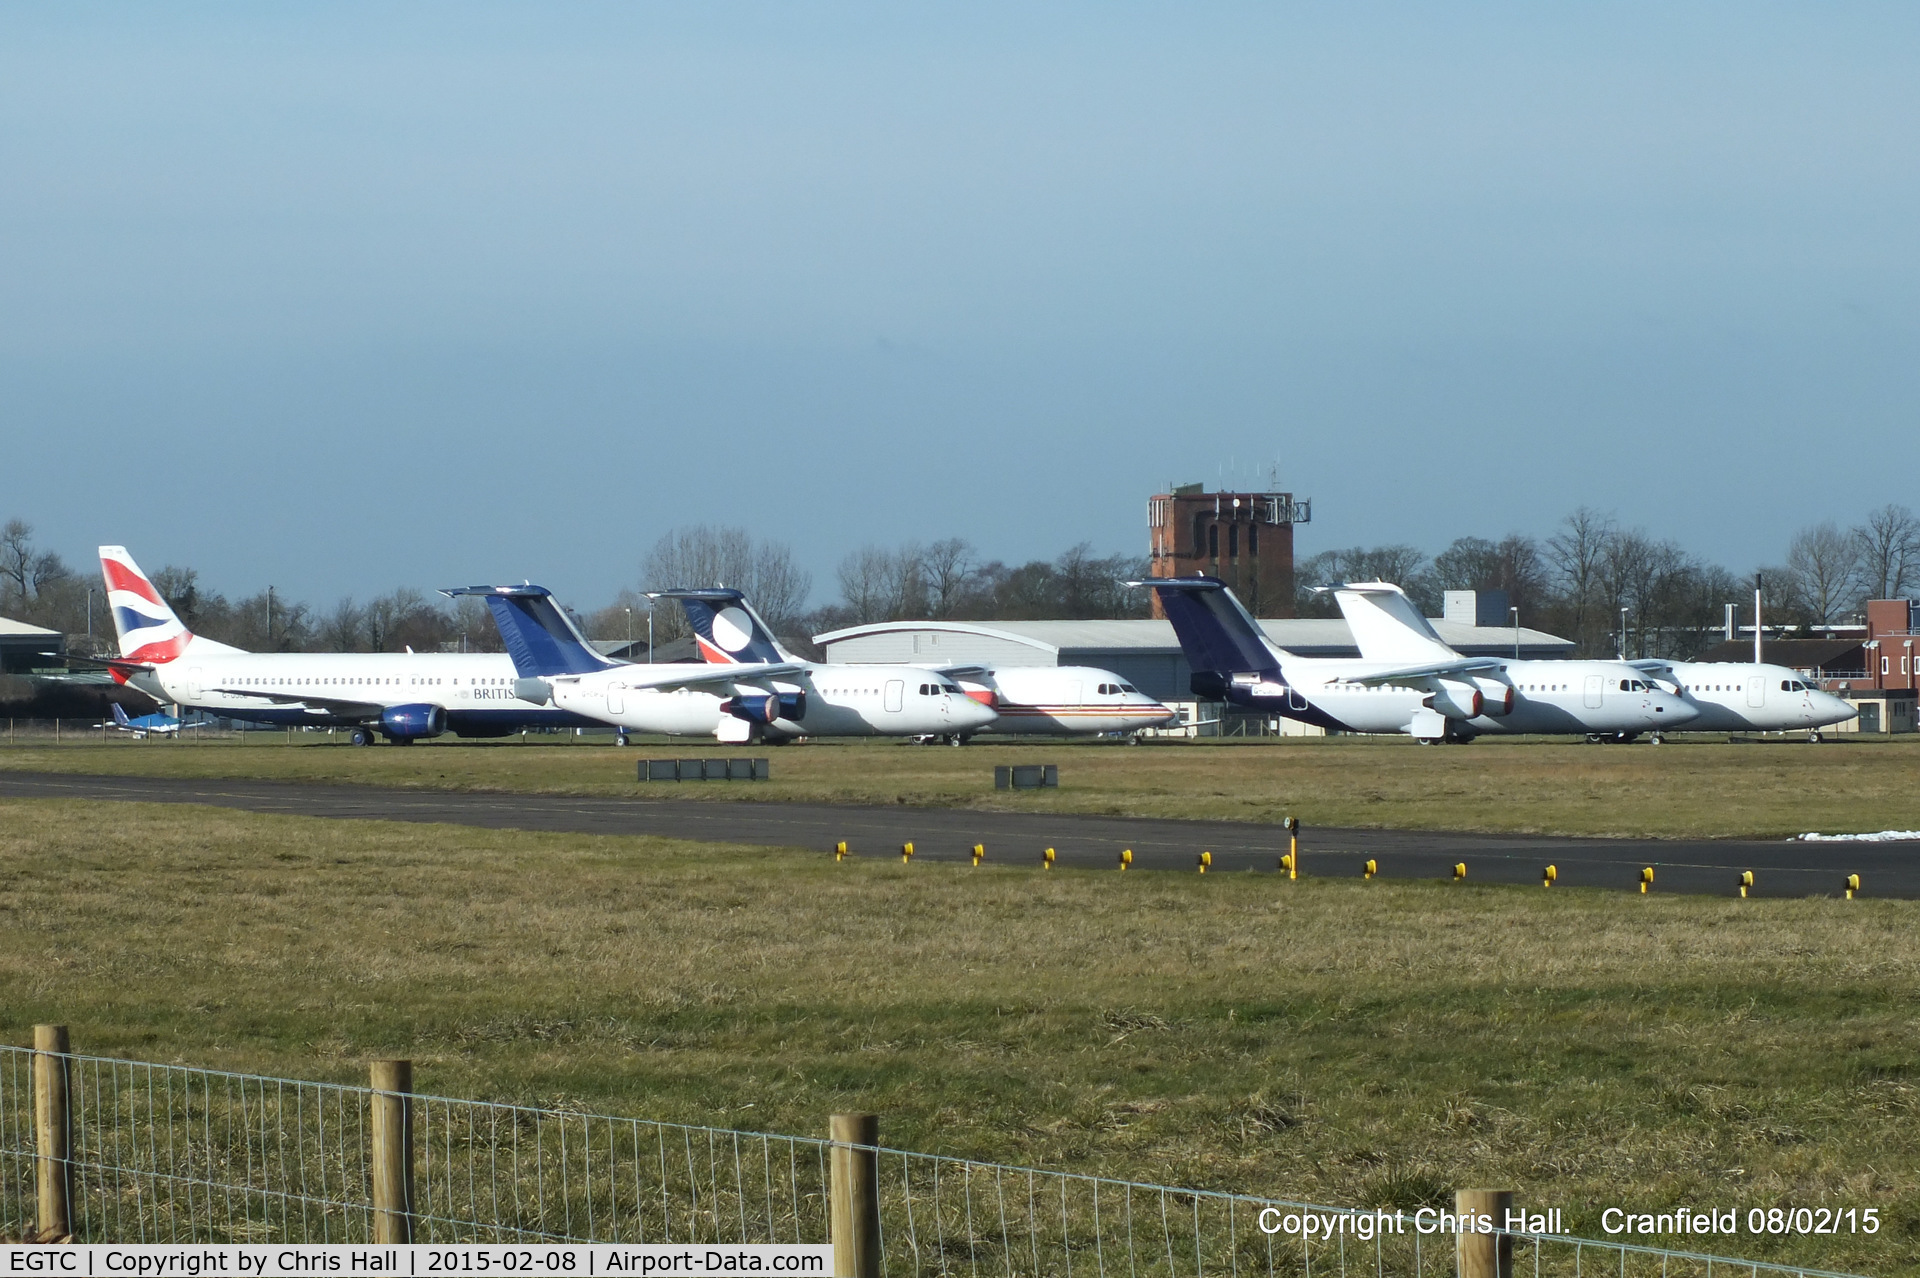 Cranfield Airport, Cranfield, England United Kingdom (EGTC) - four BAe 146's and a B737 in storage at Cranfield